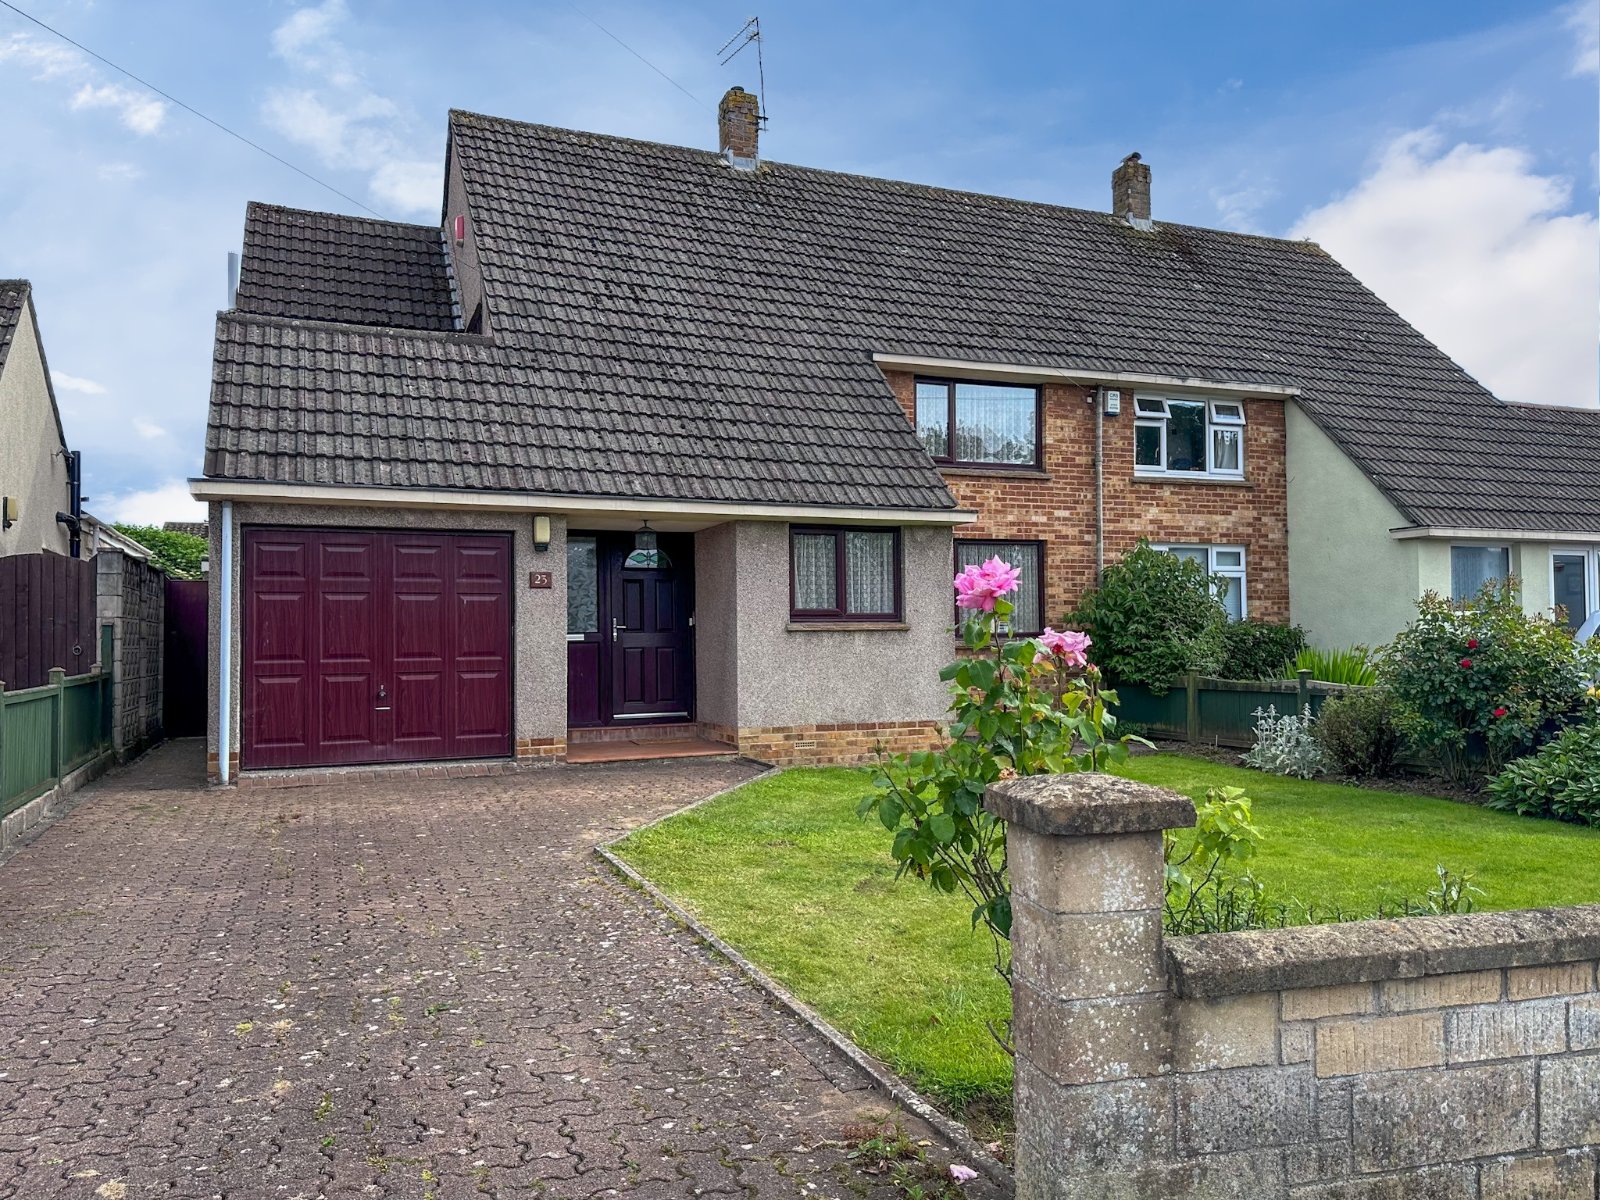 Sunnymede Road, Nailsea, North Somerset, BS48